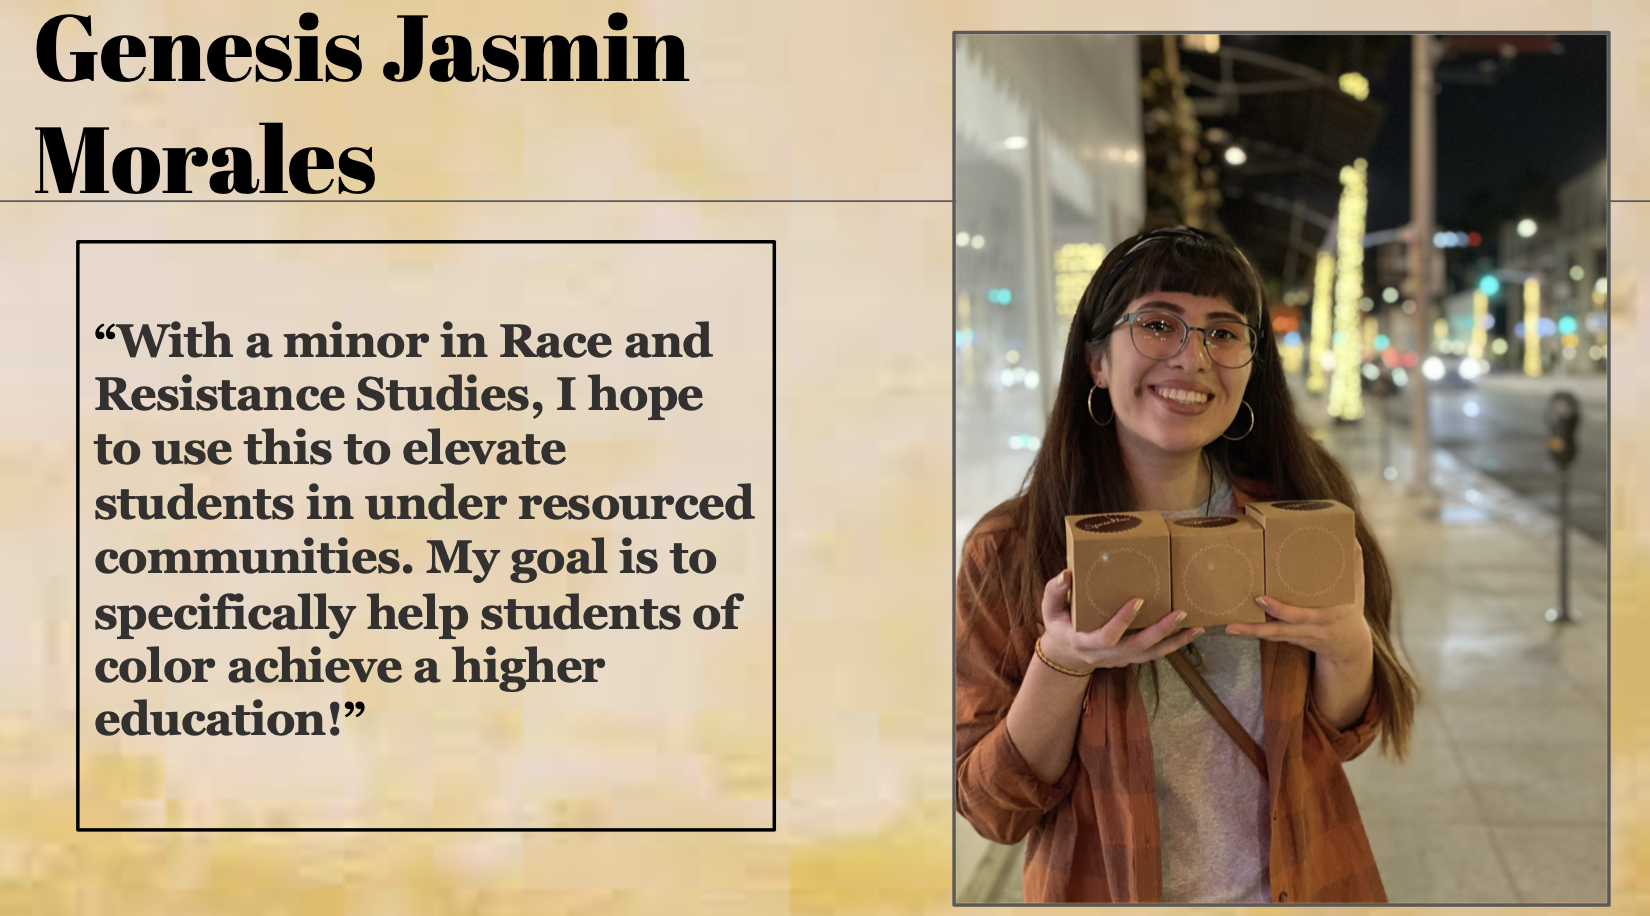 Genesis Jasmin Morales with a minor in Race and Resistance Studies, she hopes to use this to elevate students in under resourced communities.